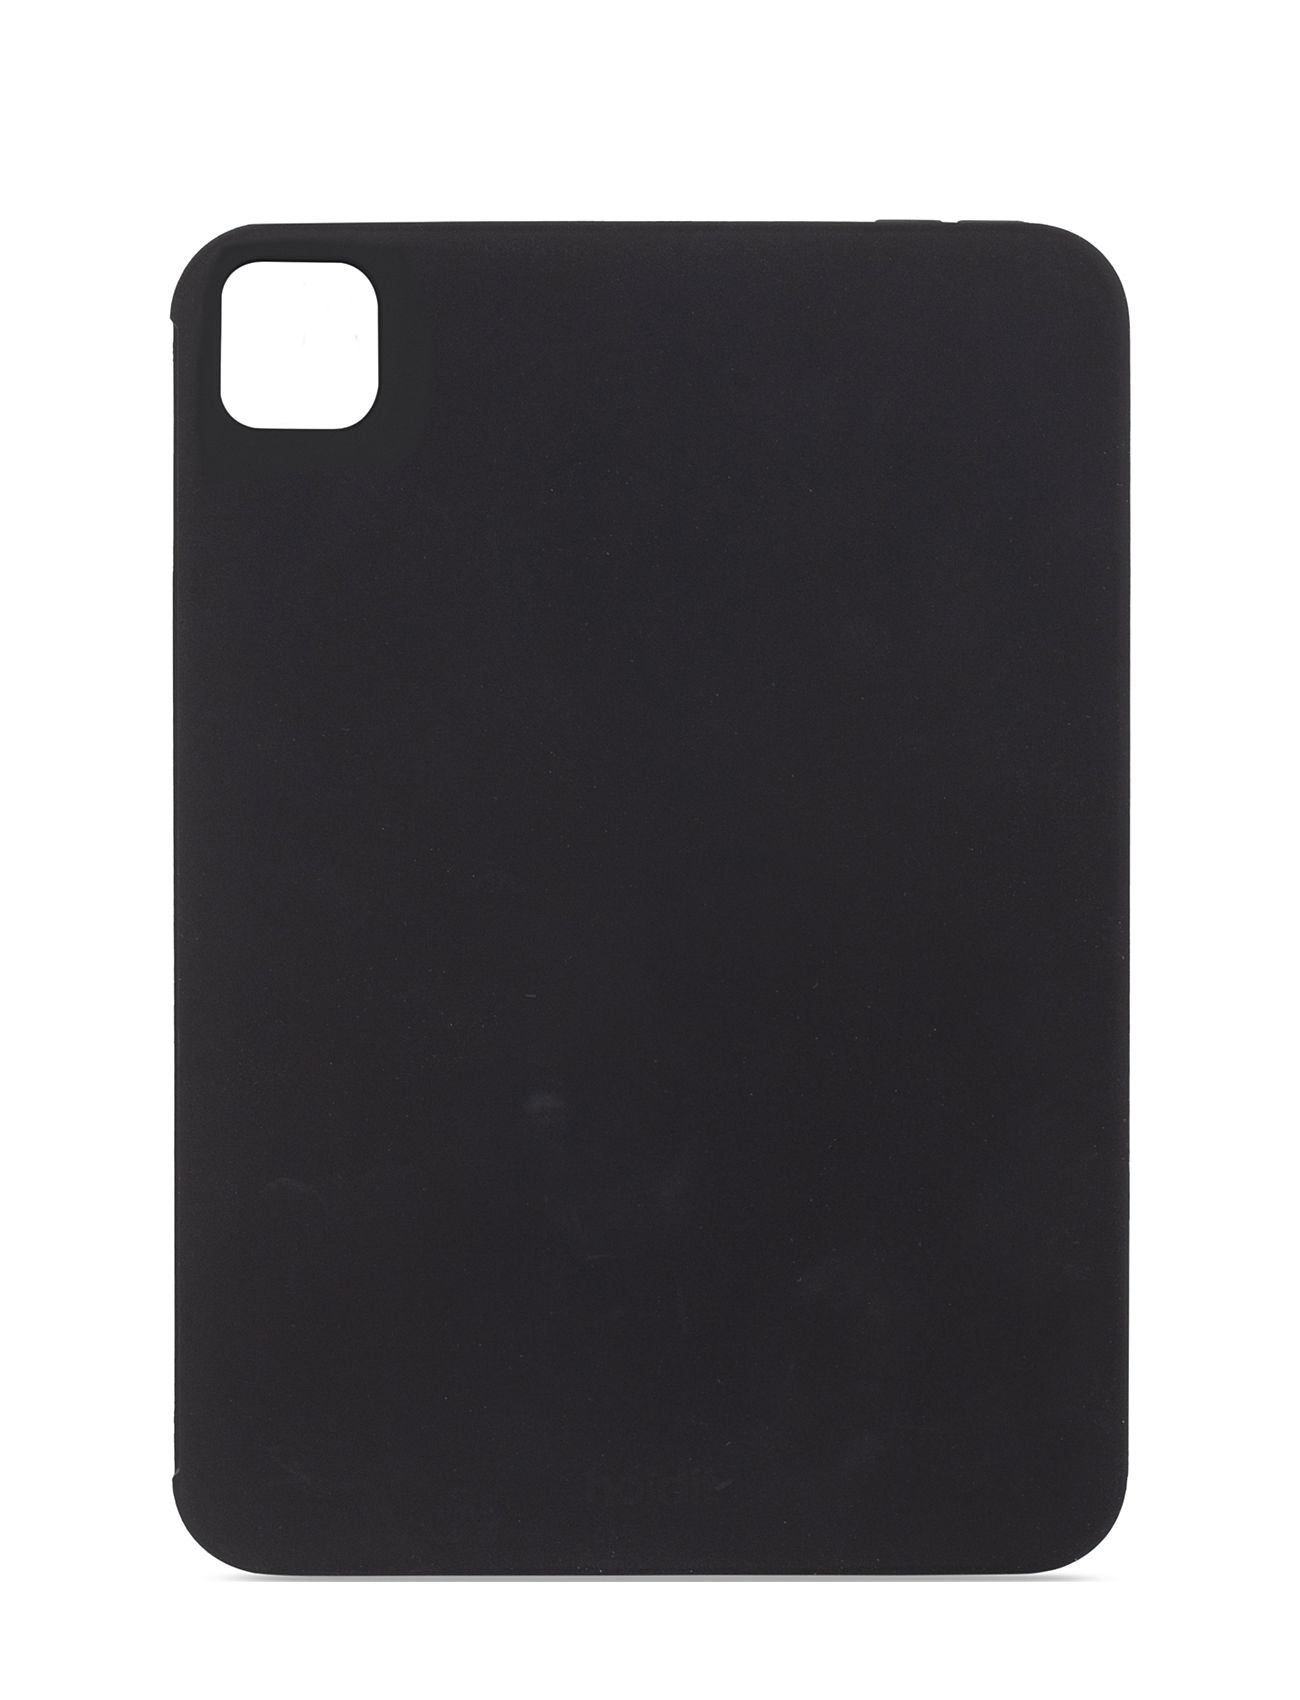 Silic Case Ipad Pro 11 Mobilaccessory-covers Tablet Cases Black Holdit